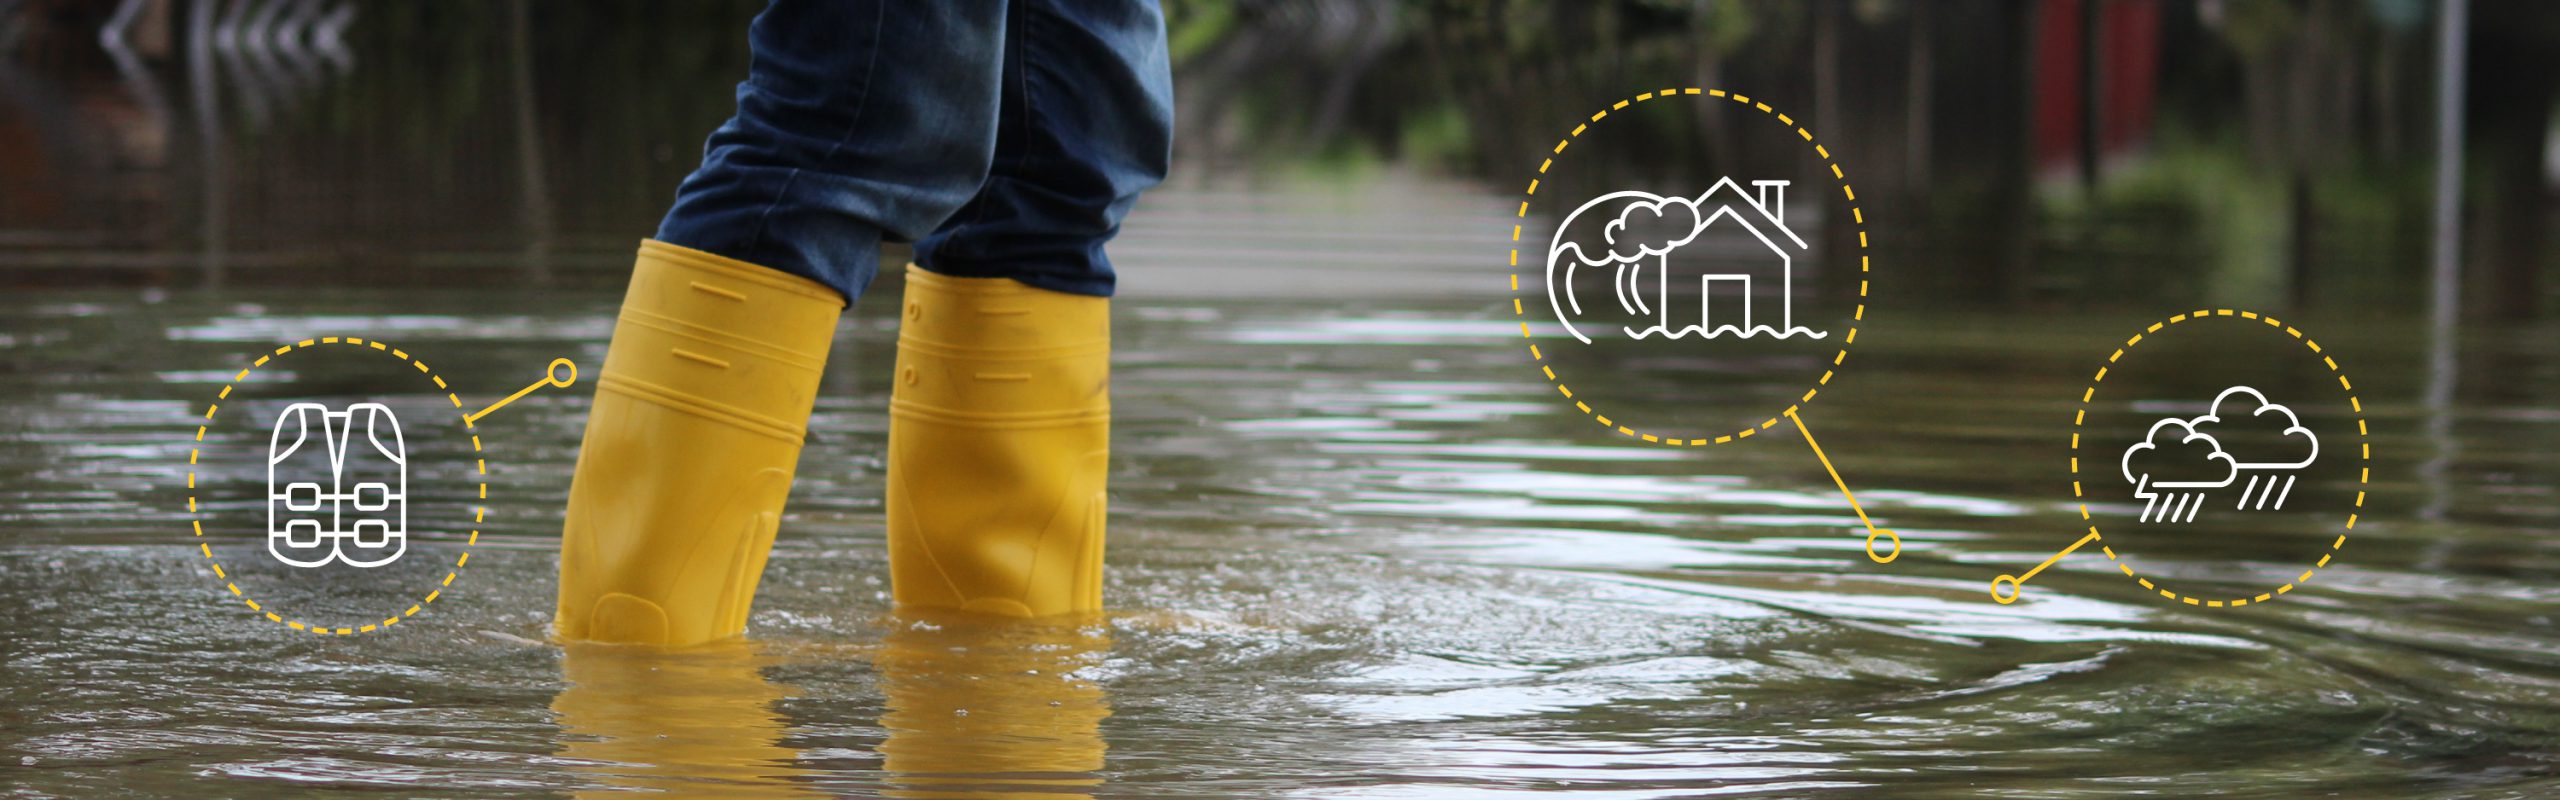 The lower half of a person, wearing wellington boots, standing in flood water.